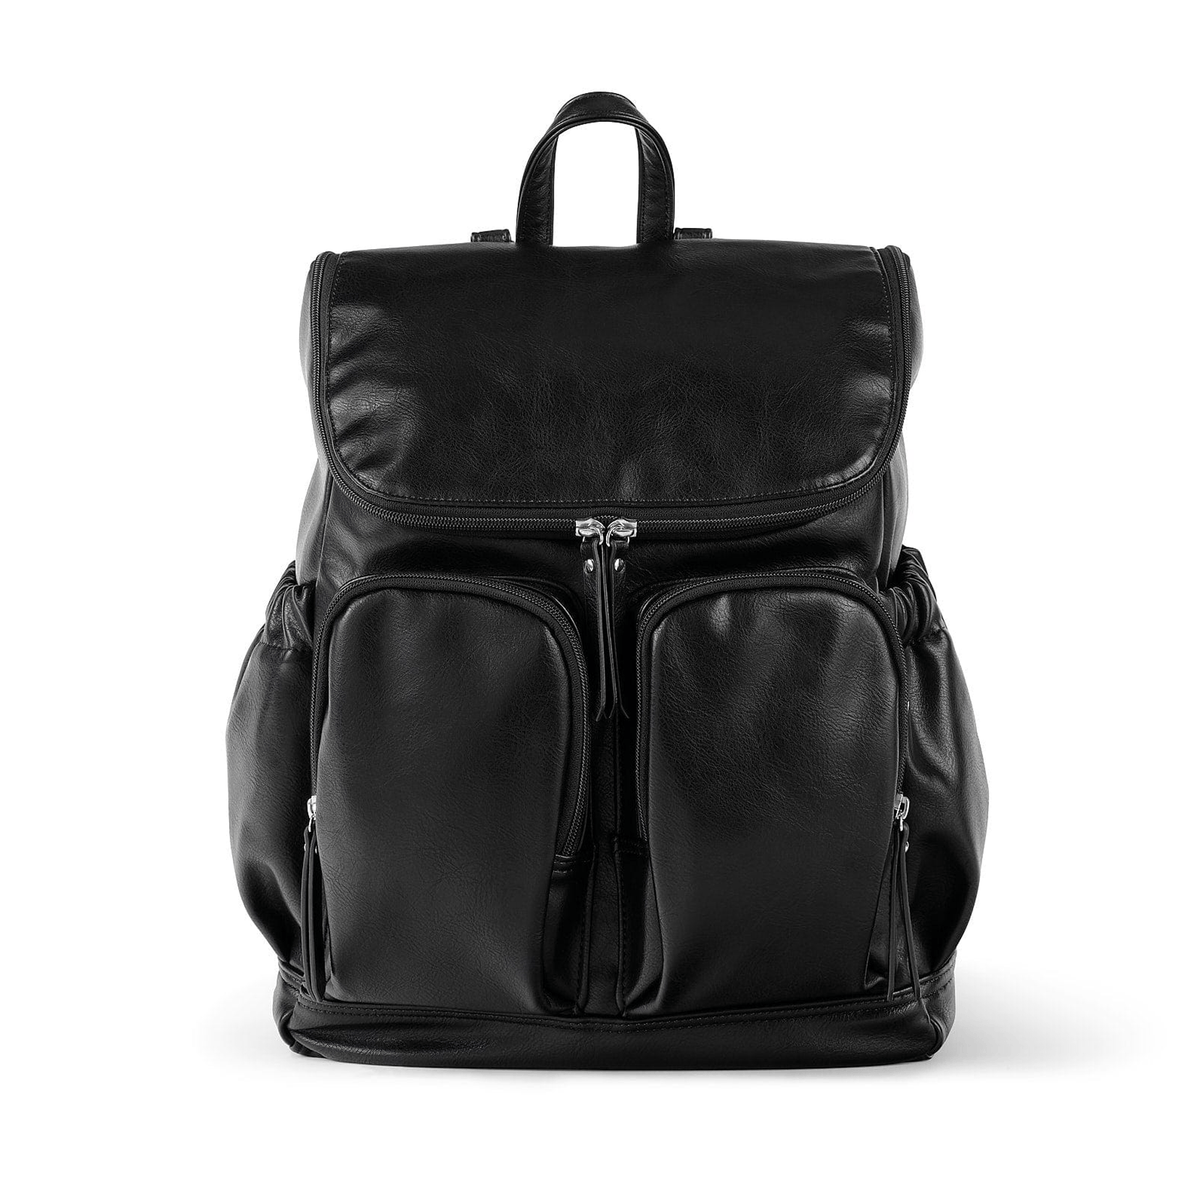 Signature Nappy Backpack - Black Faux Leather